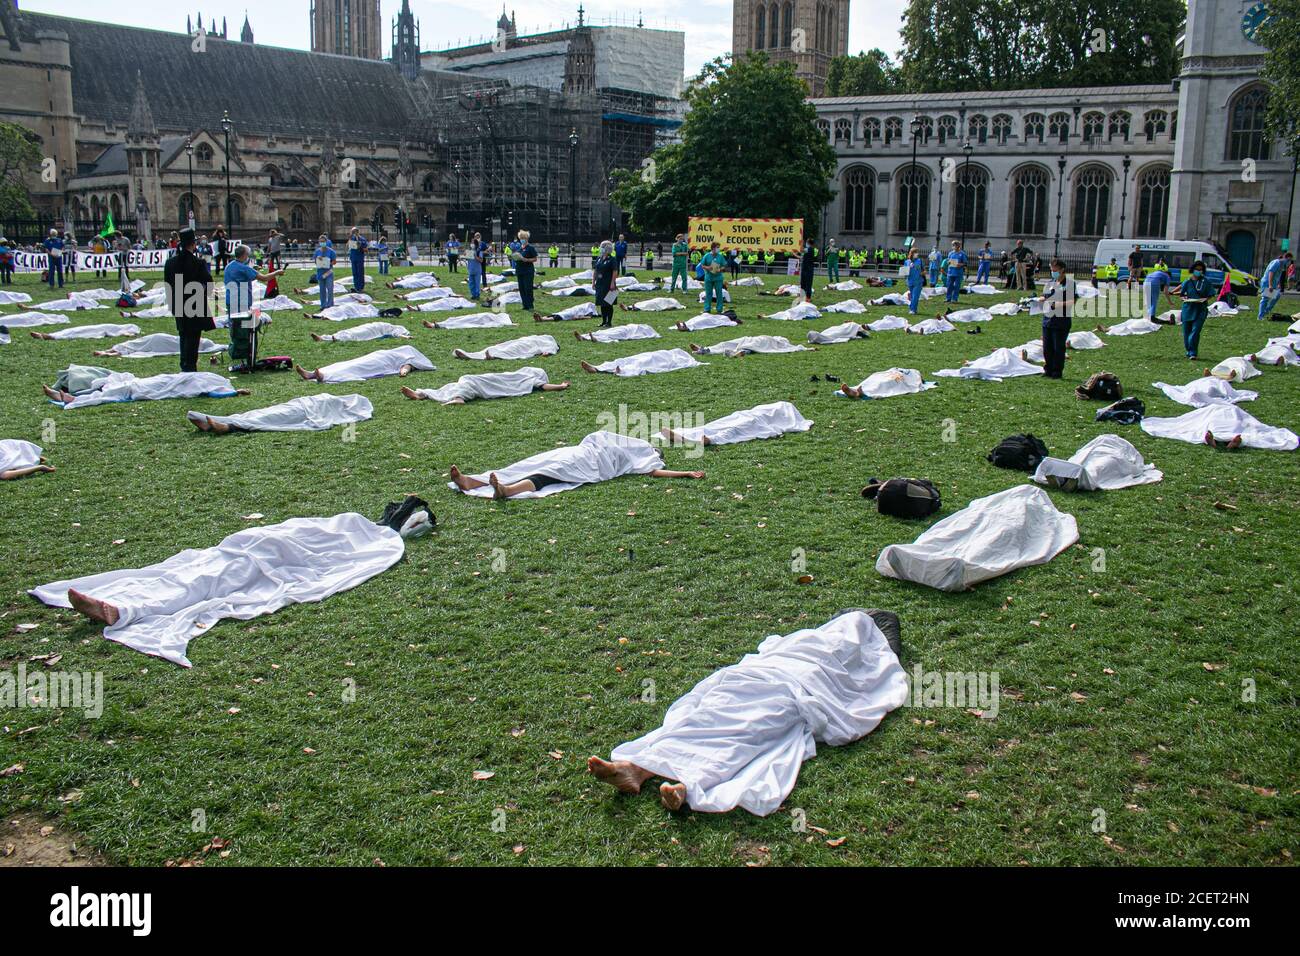 WESTMINSTER LONDON, UK - 2 September 2020 Climate activists from Extinction rebellion lying as a dead body under a white shroud  in Parliament Square. Extinction Rebellion have vowed  to continue protests over 12 days in London  due to the government’s failure to act on the climate and ecological emergency and demand the government act now  and to support the Climate and Ecological Emergency Bill. Credit: amer ghazzal/Alamy Live News Stock Photo